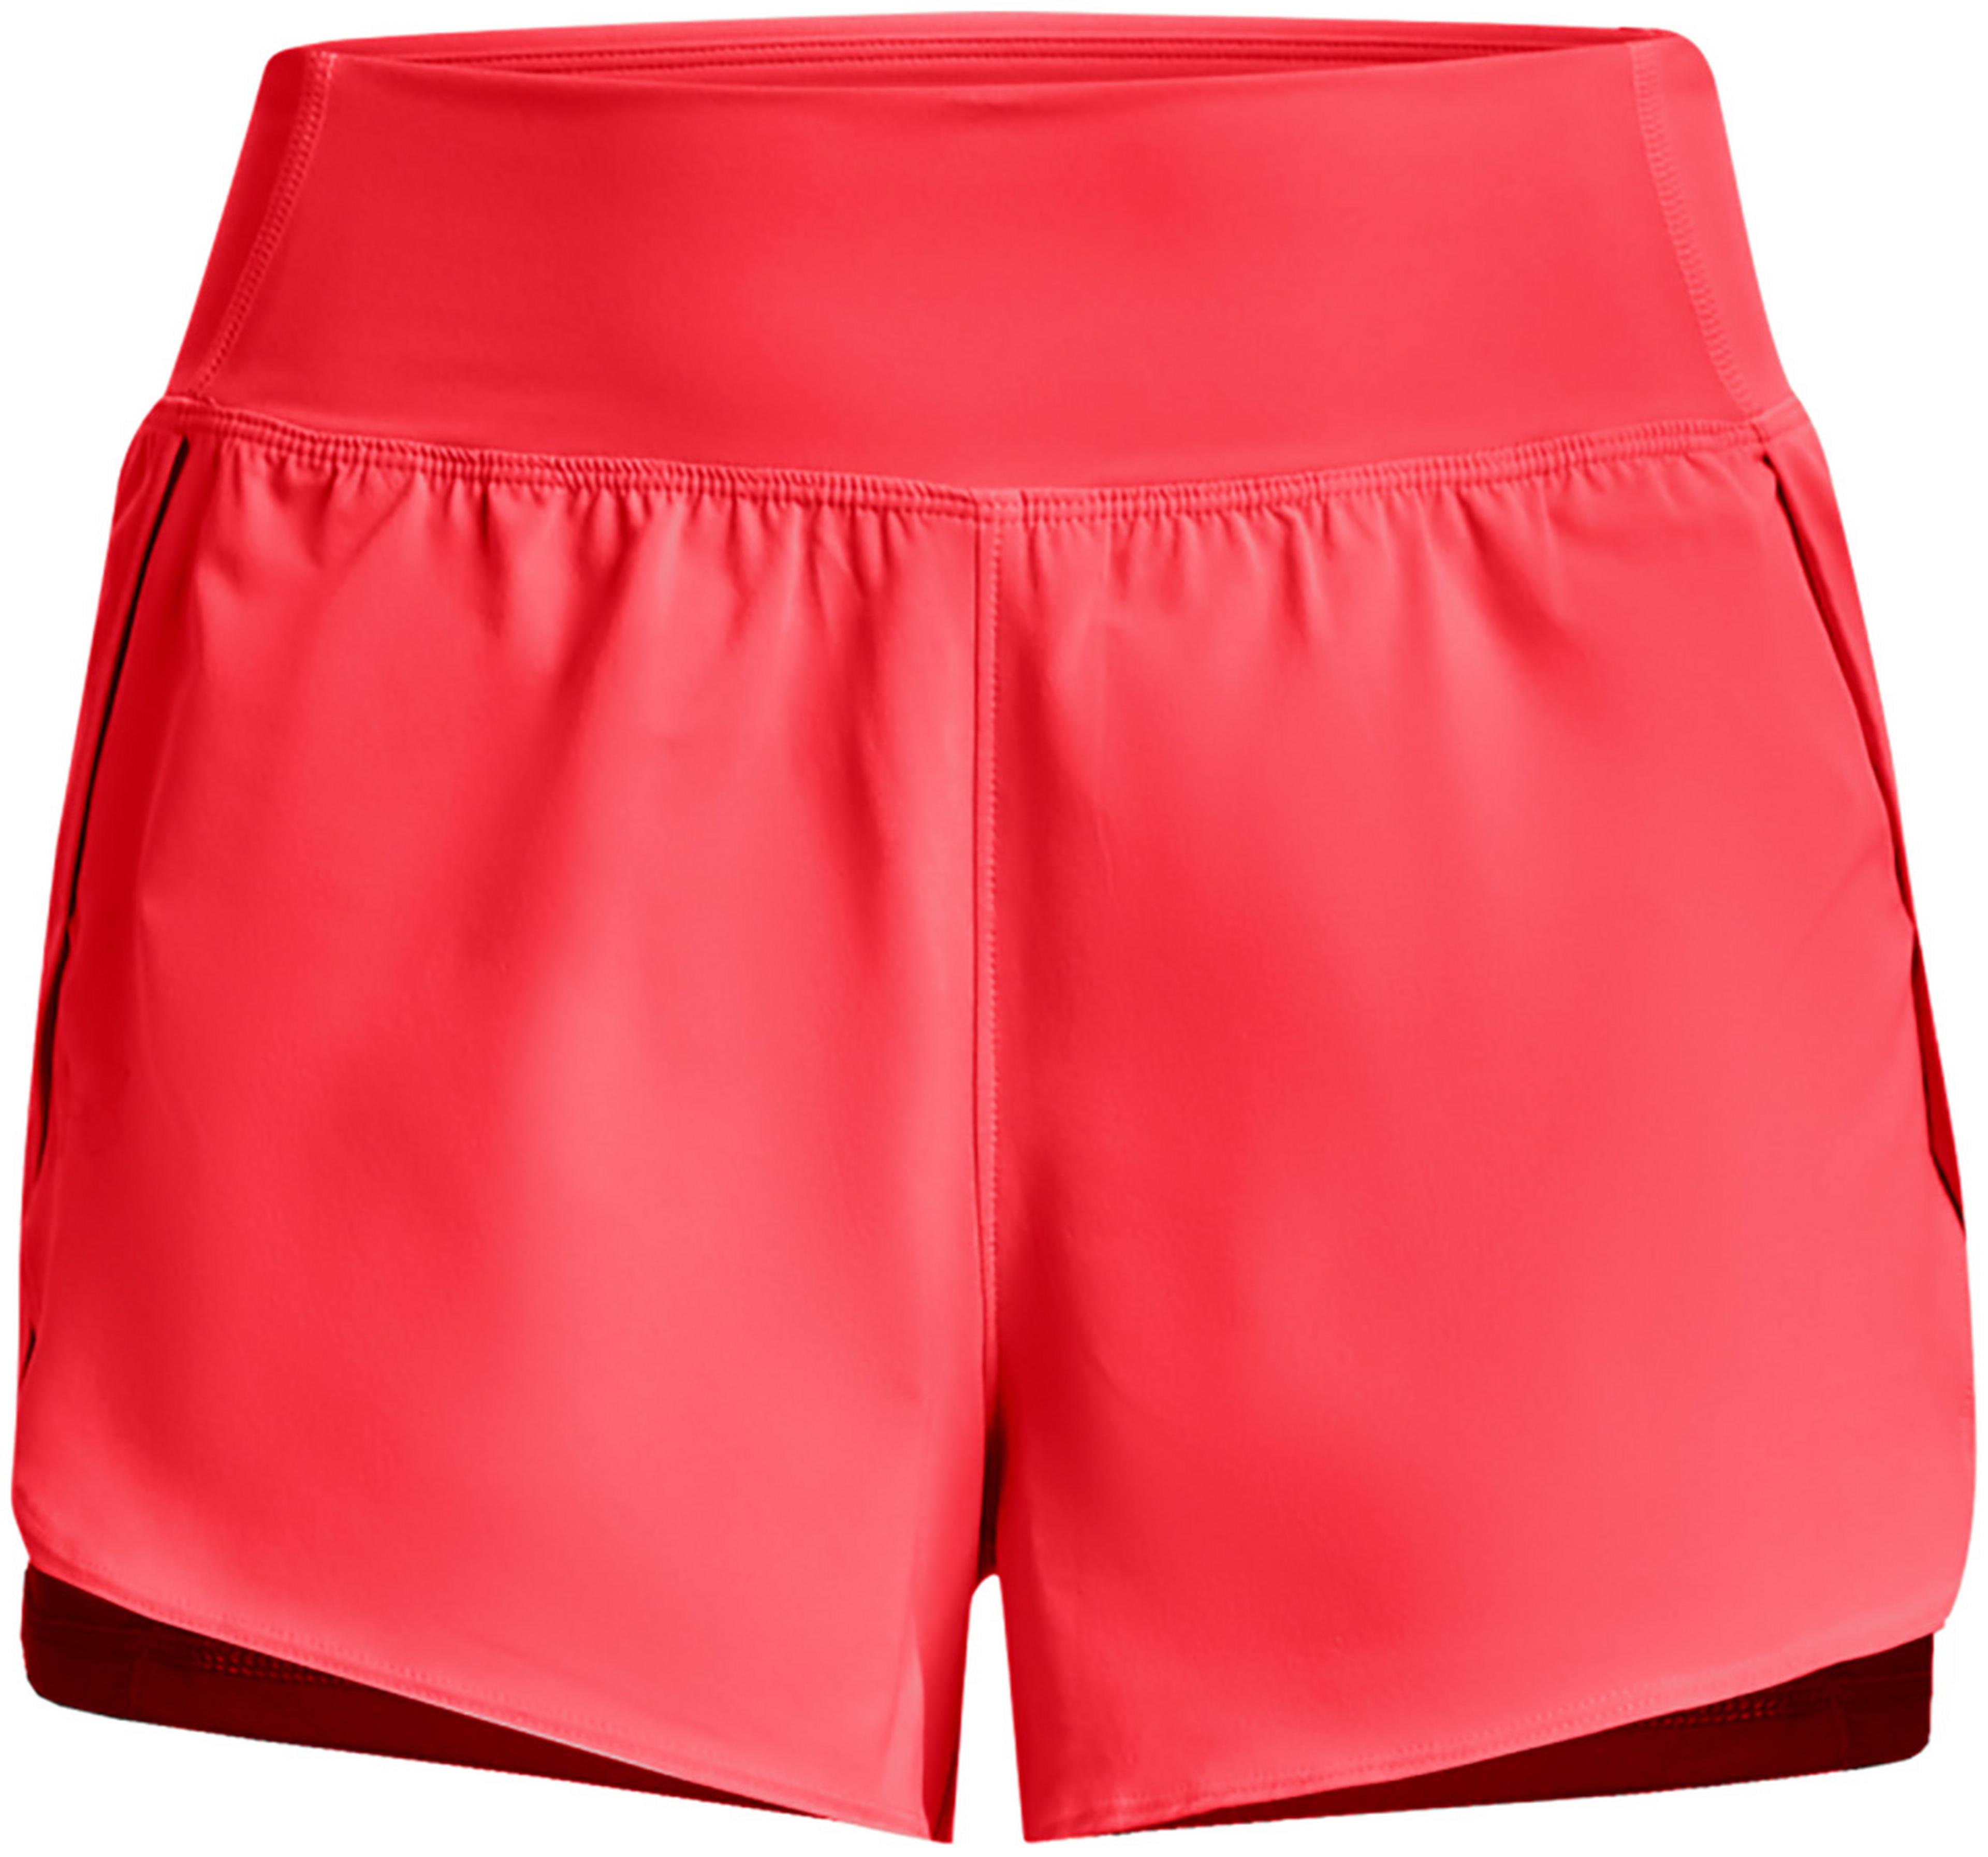 Under Armour Women's Flex Woven 2in1 Shorts | Wiggle